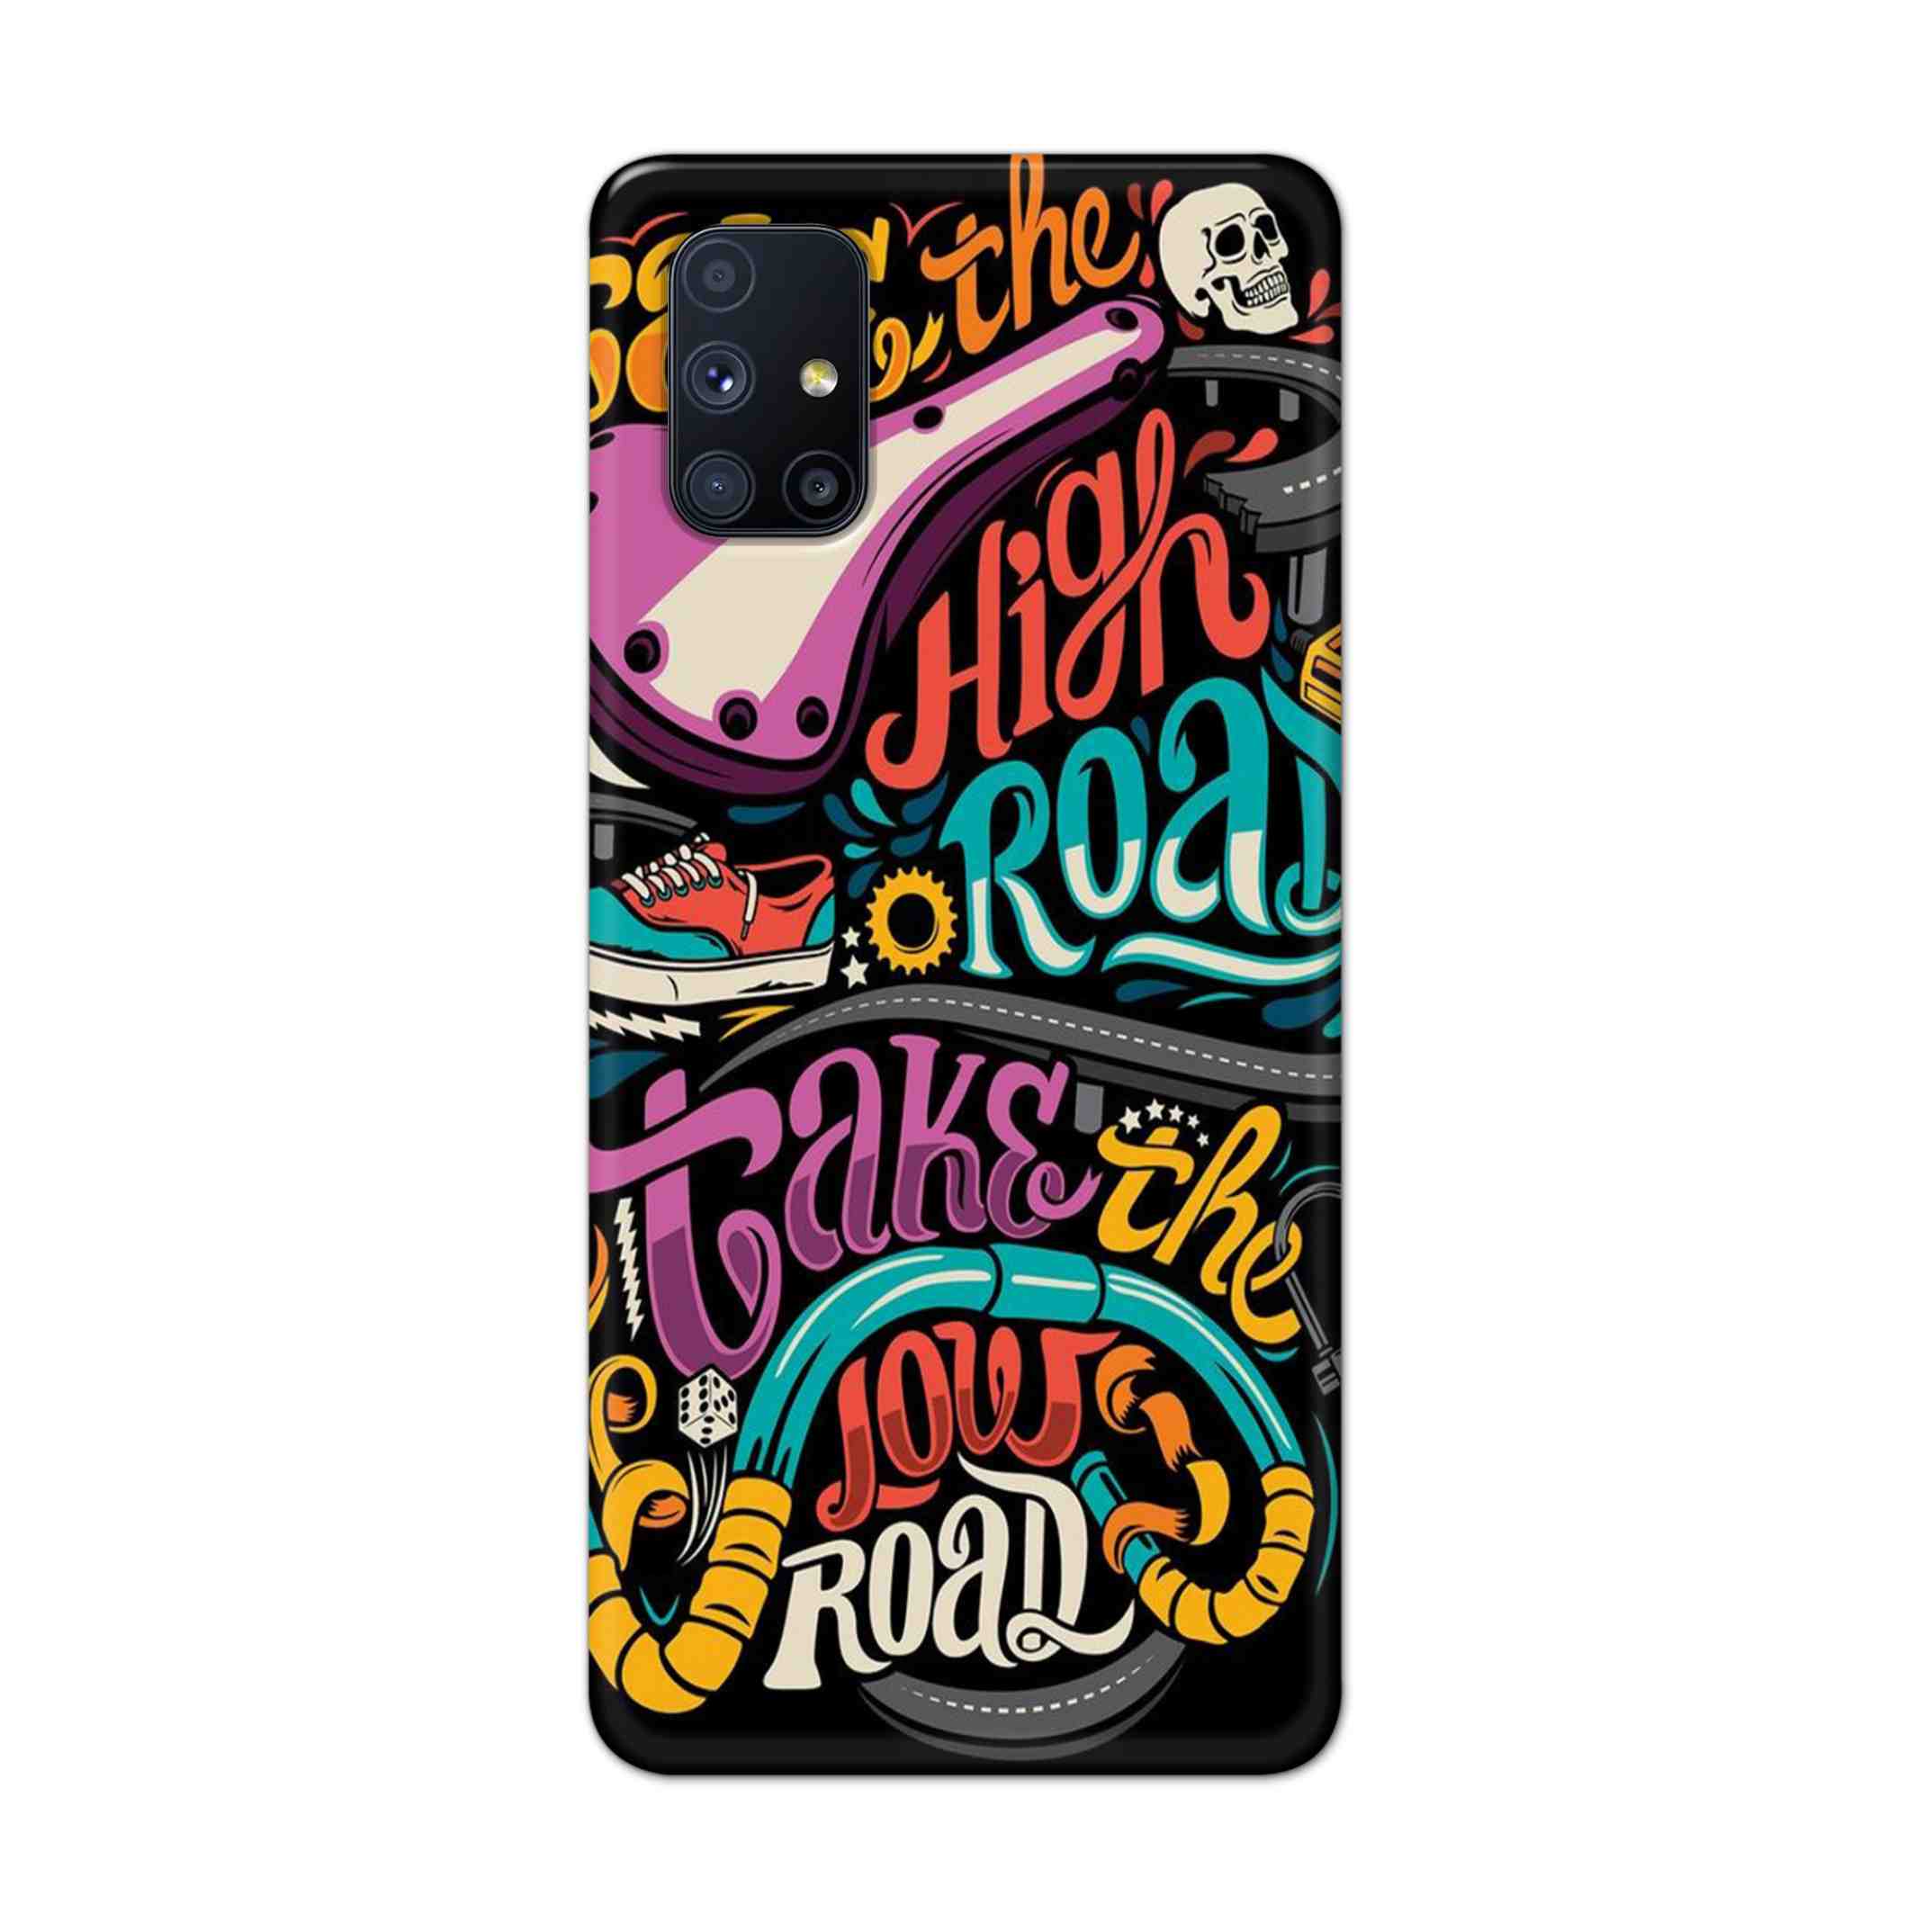 Buy Take The High Road Hard Back Mobile Phone Case Cover For Samsung Galaxy M51 Online